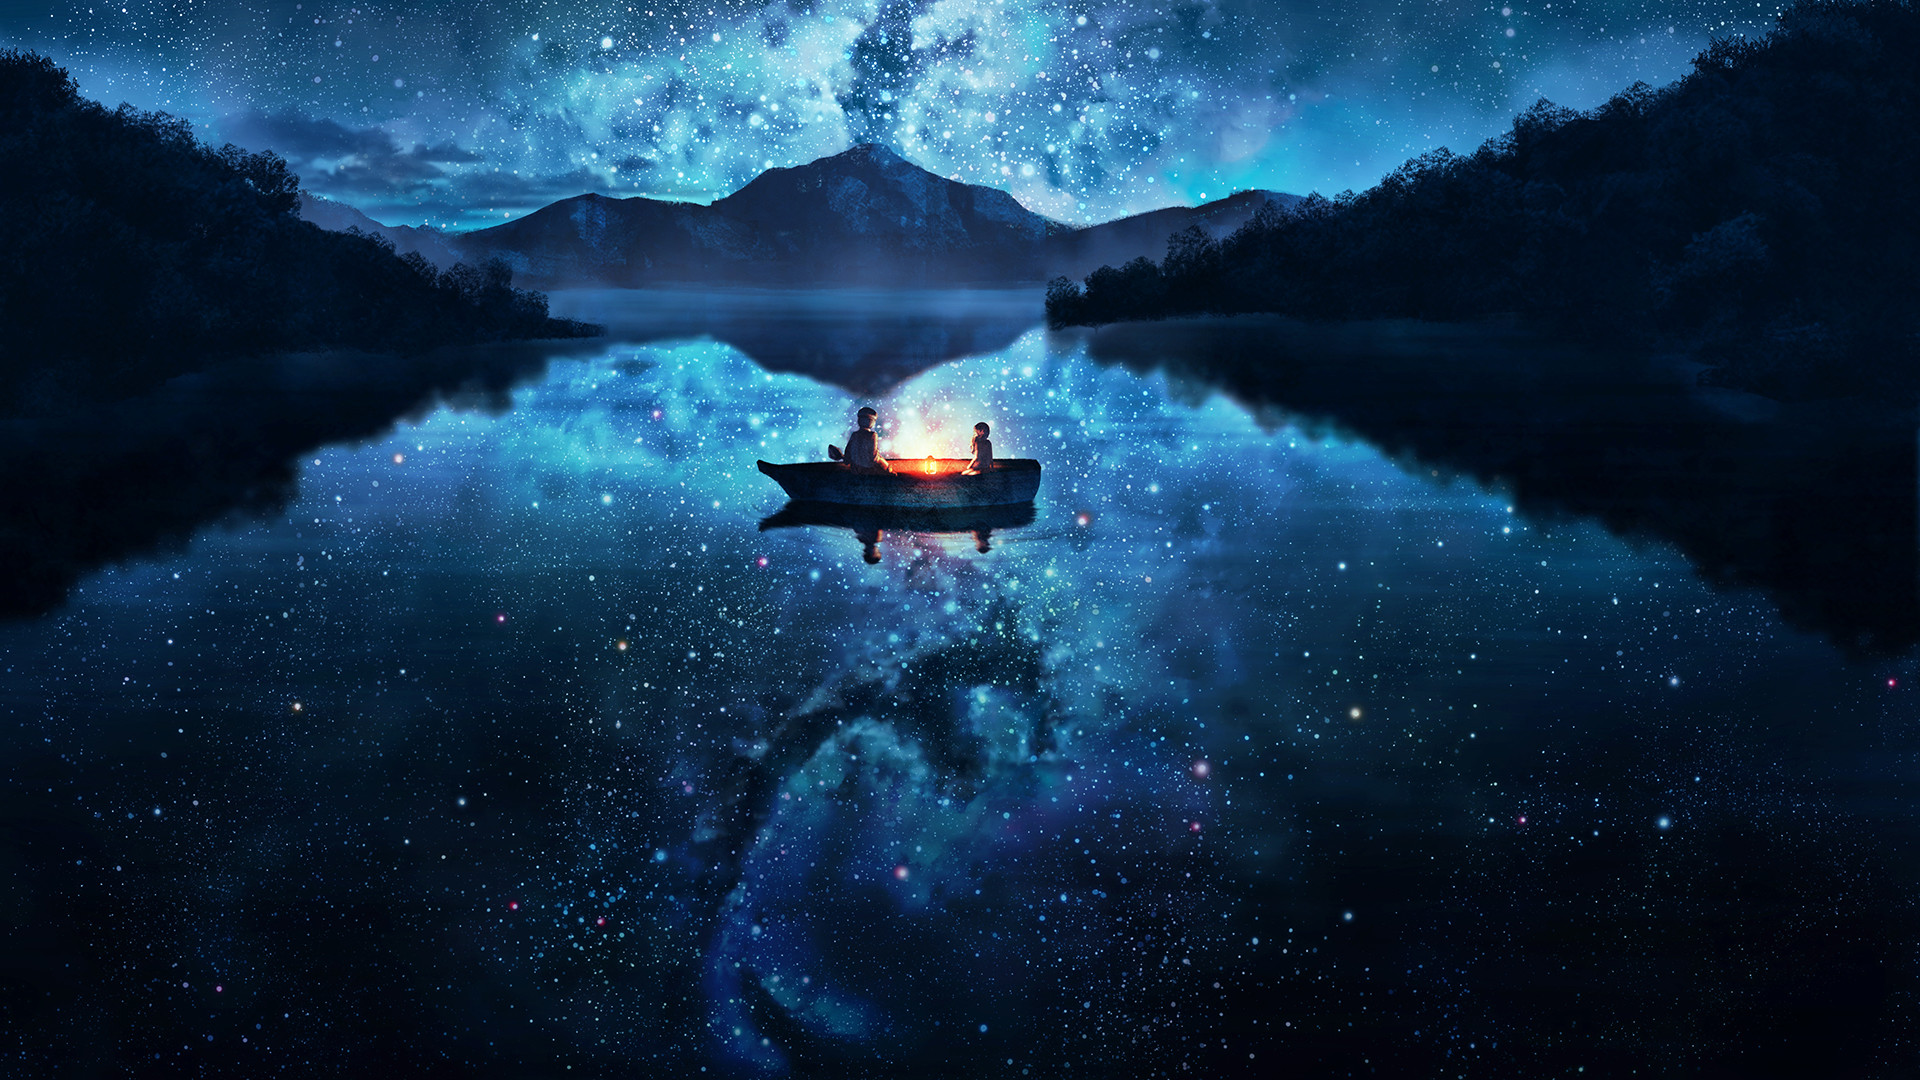 1920x1080 River of the Lost Stars [Original] [] Need #iPhone #6S #Plus # Wallpaper/ #Background for #IPhone6SPlus? Follow iPhone 6S Plus  3Wallpapers/…